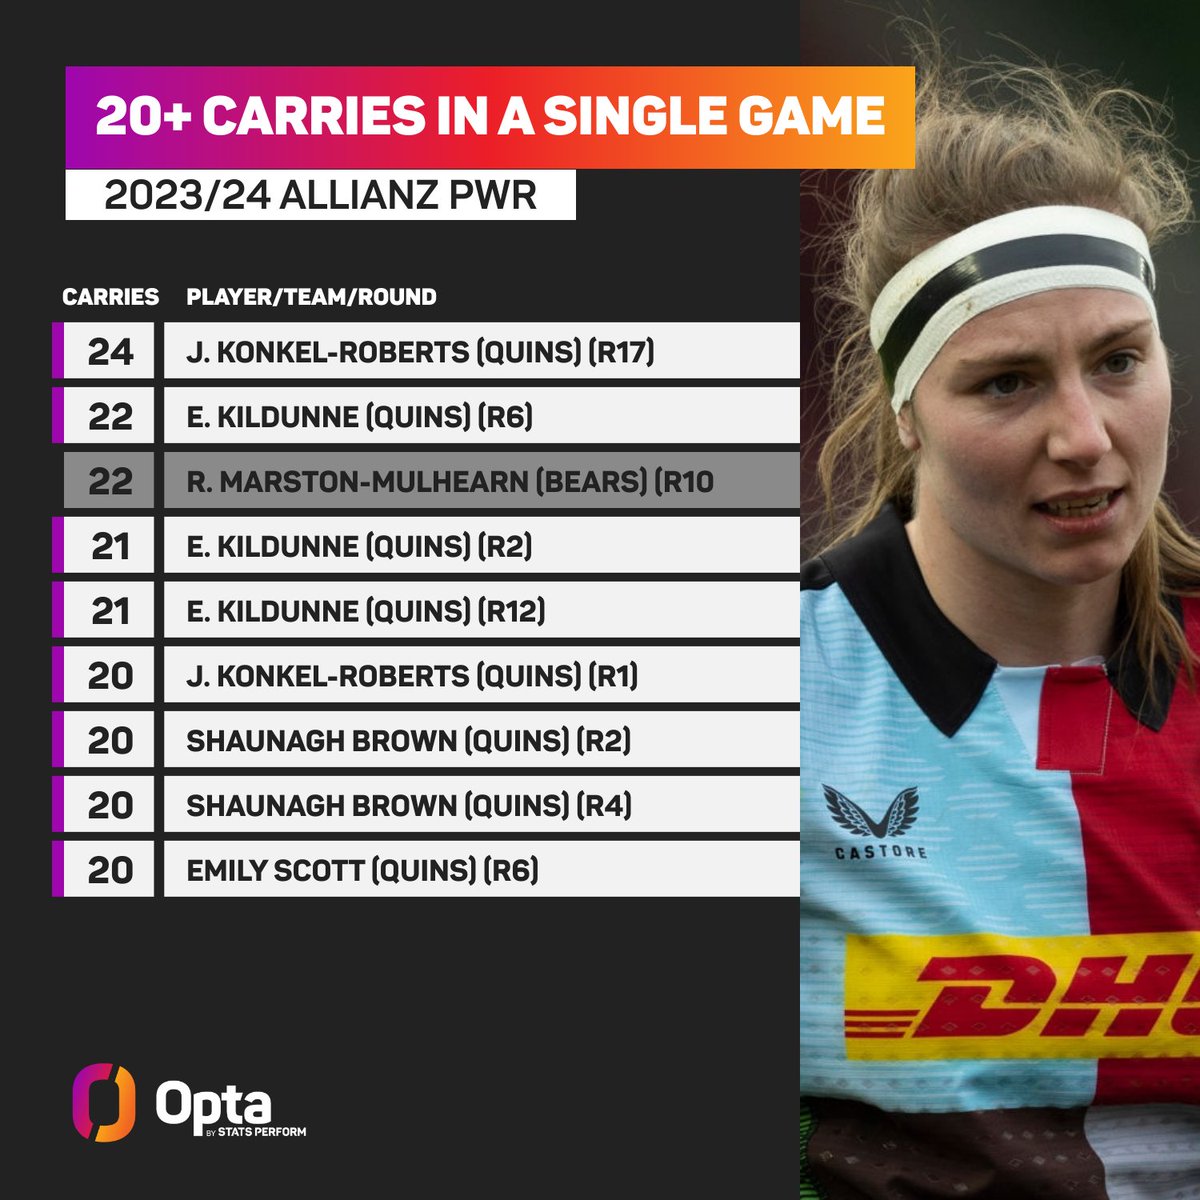 24 - @HarlequinsWomen’s Jade Konkel-Roberts made 24 carries v Bristol Bears, the most by any player in a match in @ThePWR this season; eight of the nine instances of a player making 20+ carries in the league this term have been recorded by Harlequins players. Continuity.